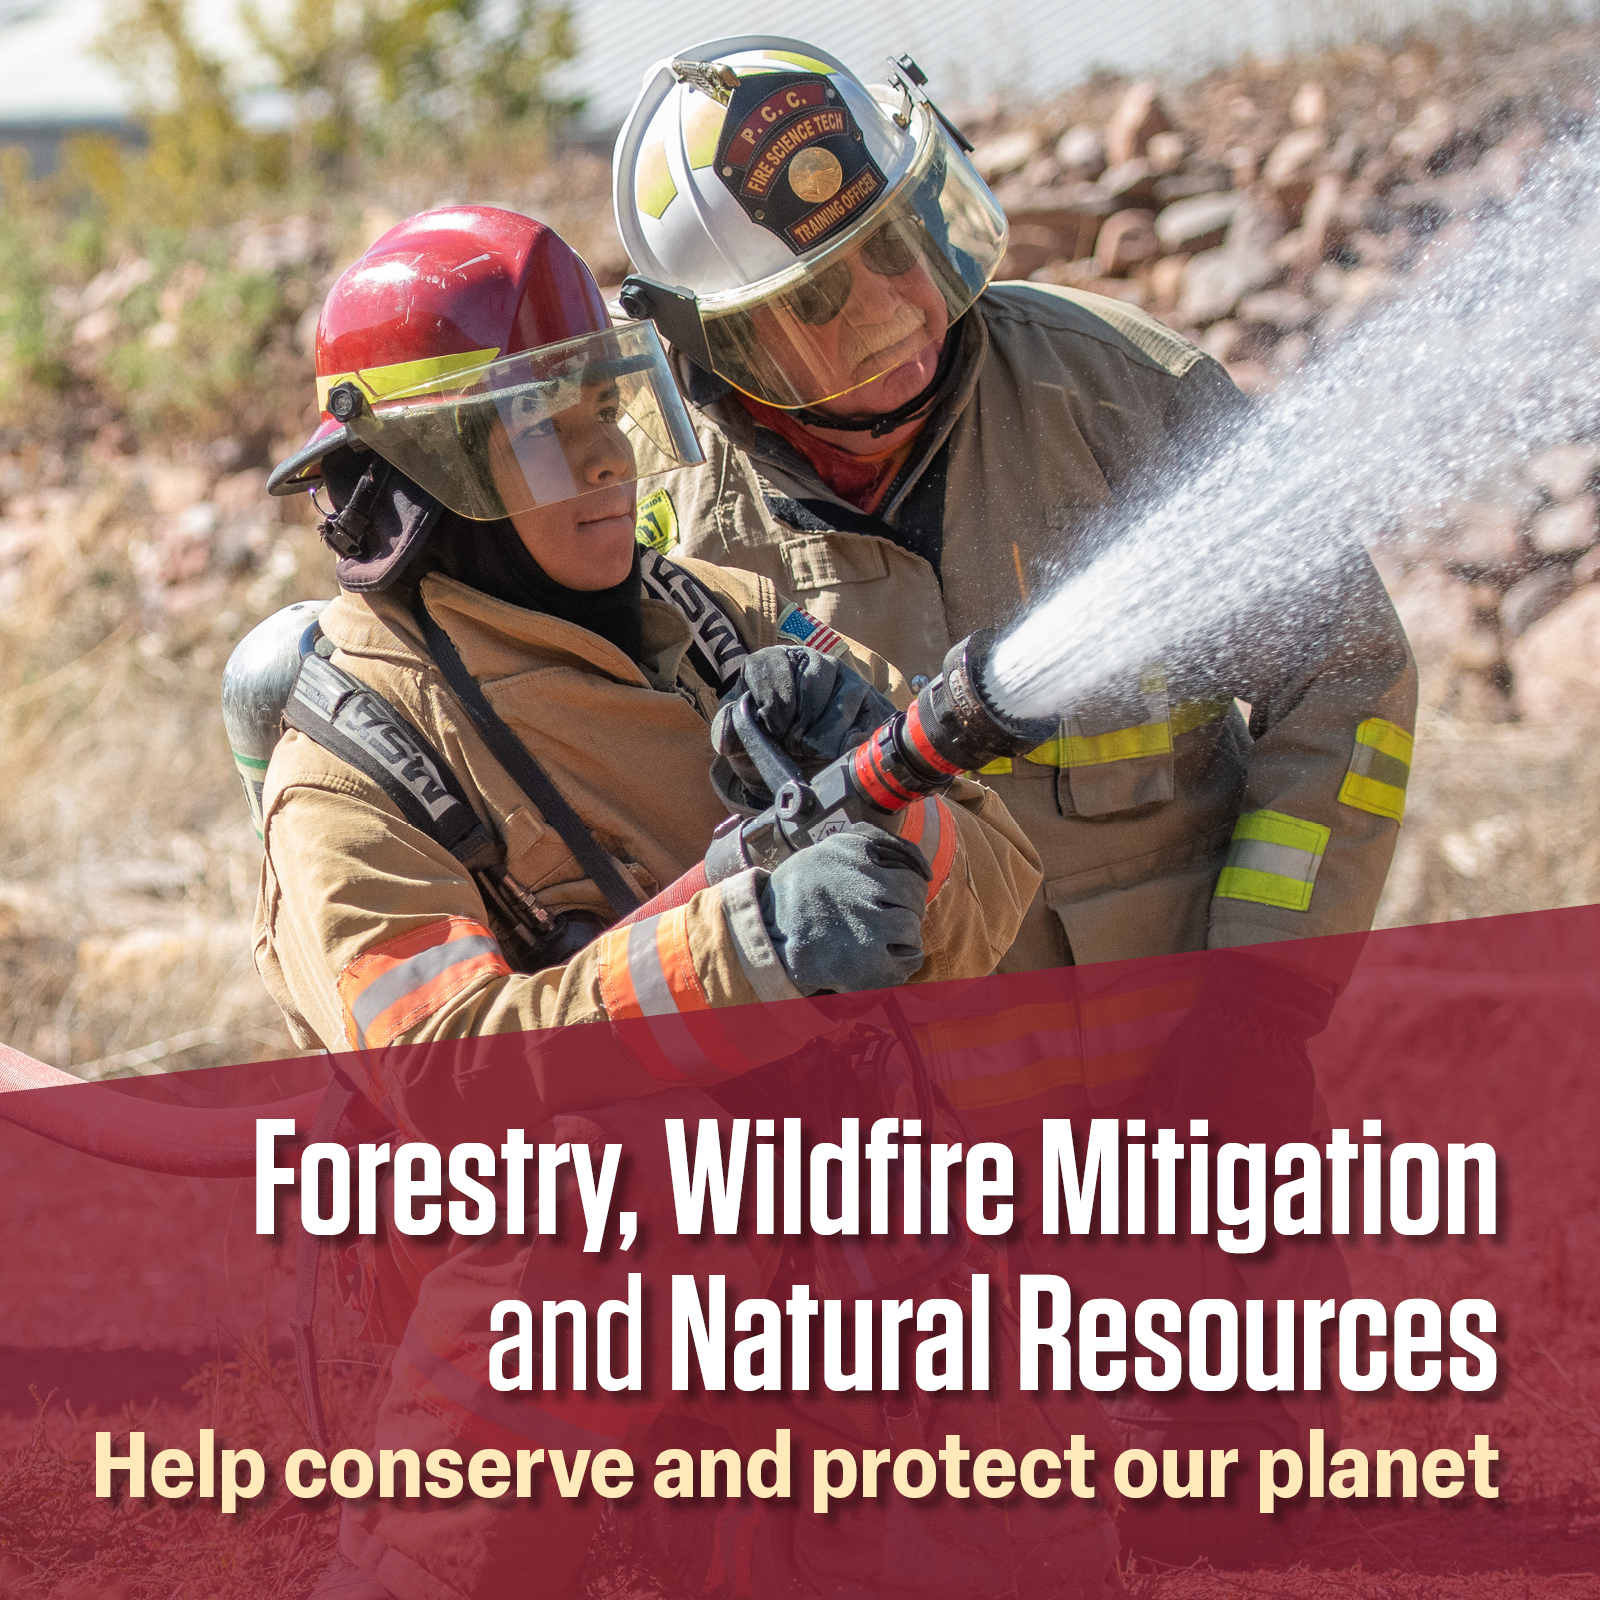 Forestry, wildfire mitigation, and natural resources - help conserve and protect our planet